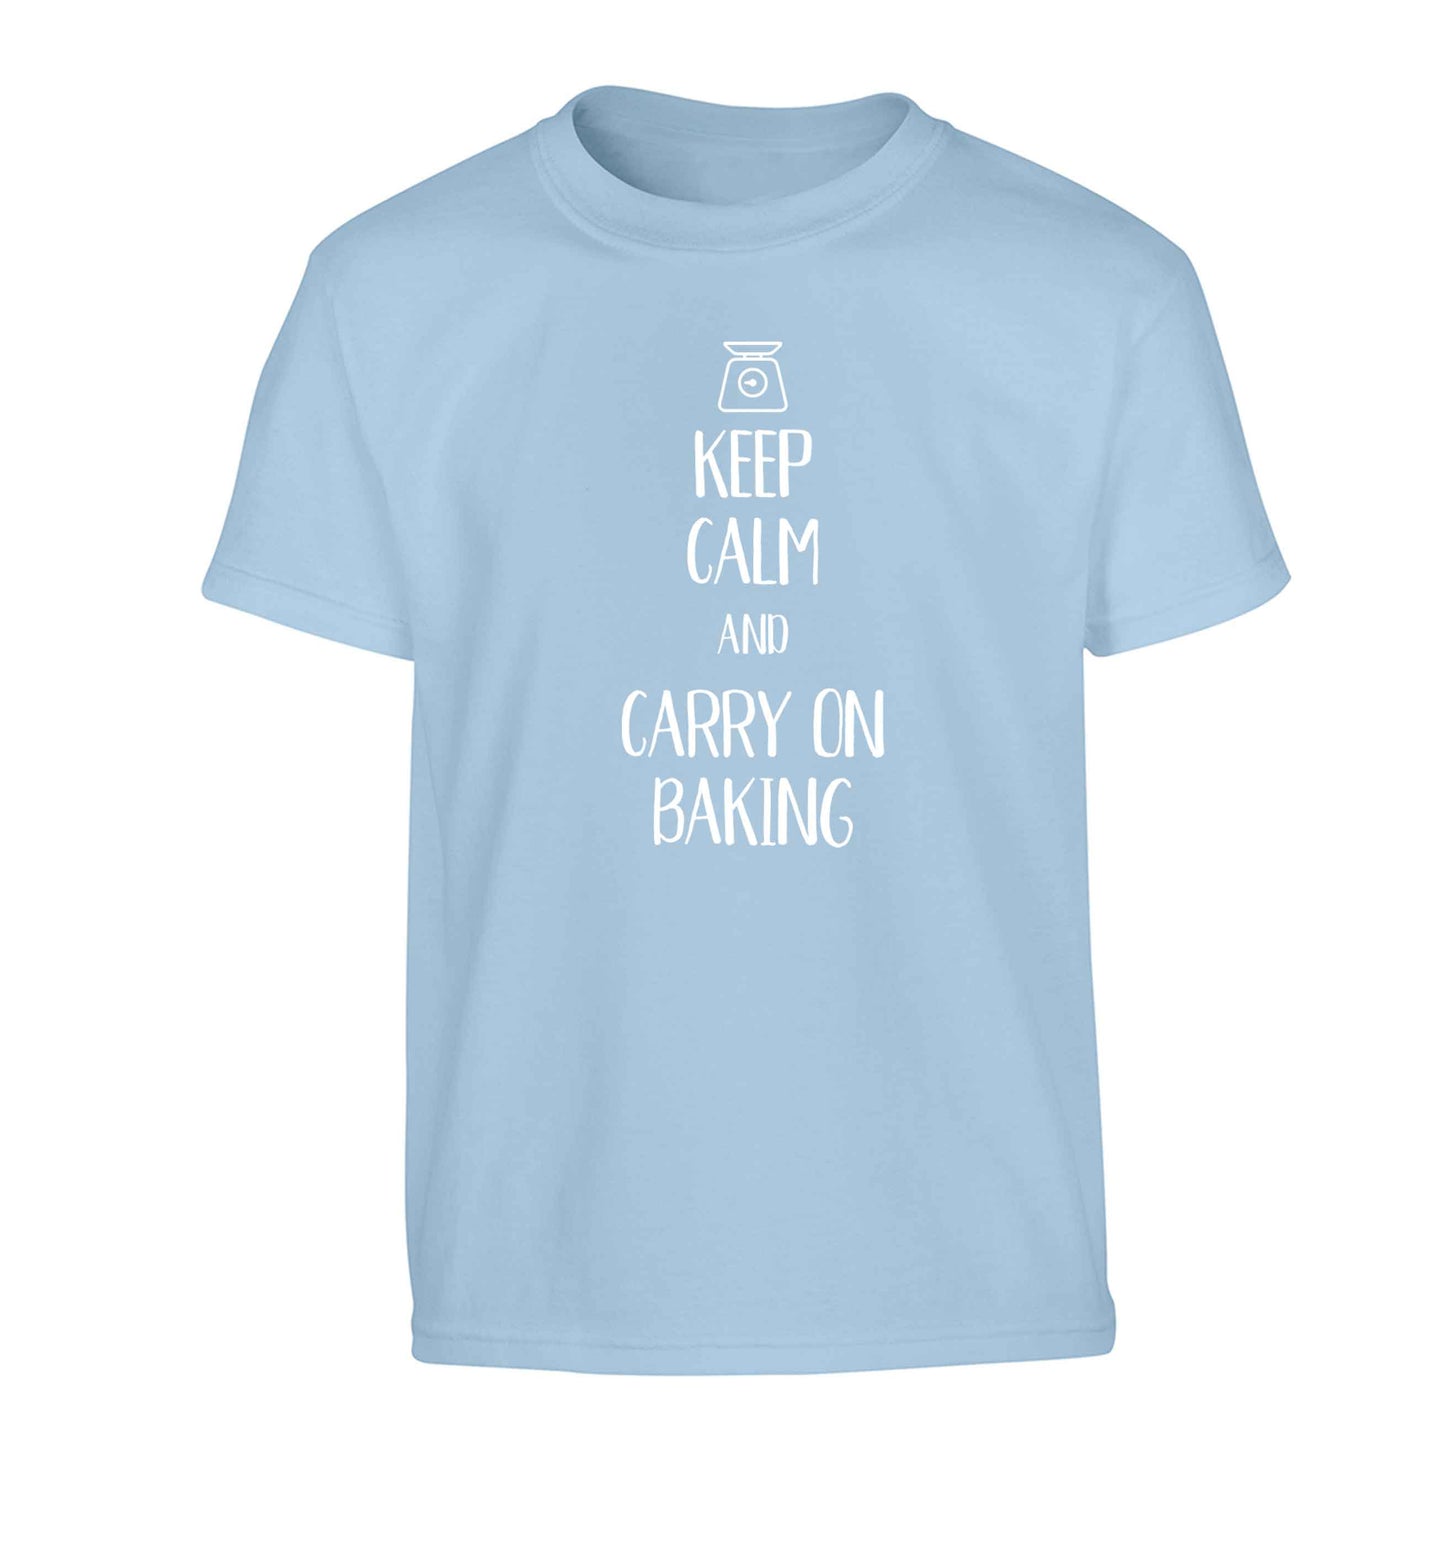 Keep calm and carry on baking Children's light blue Tshirt 12-13 Years